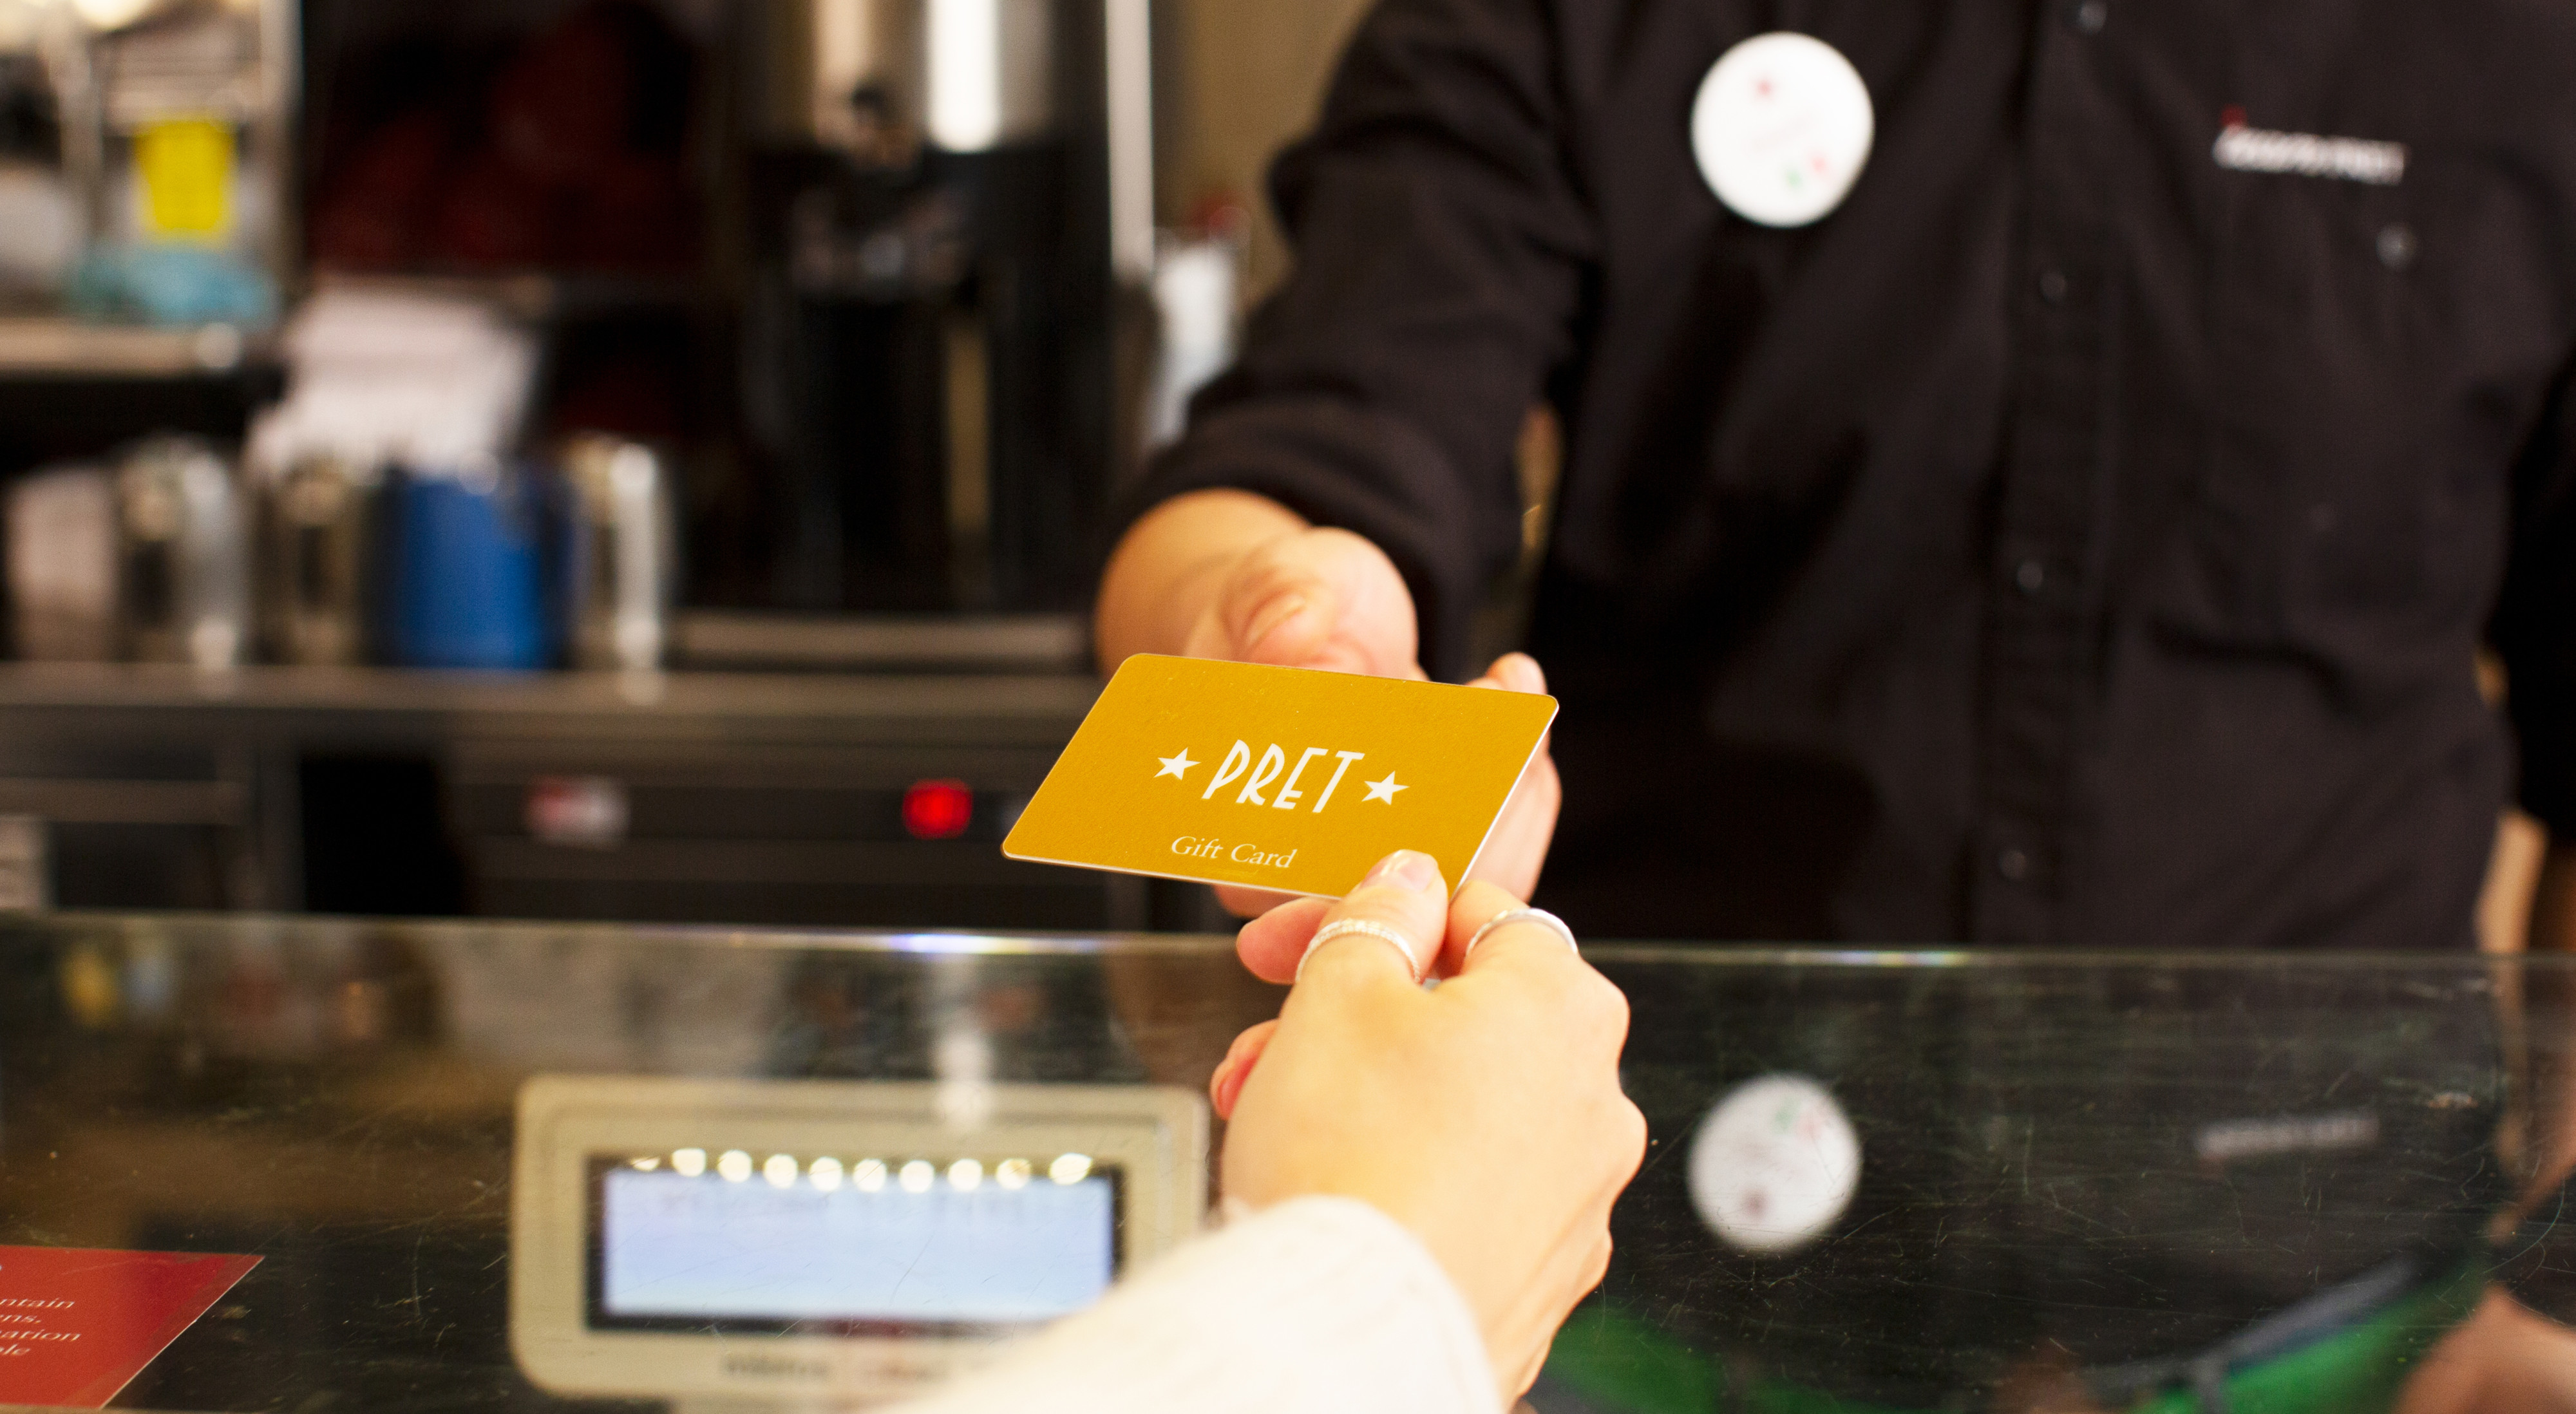 The Pret Gift Card